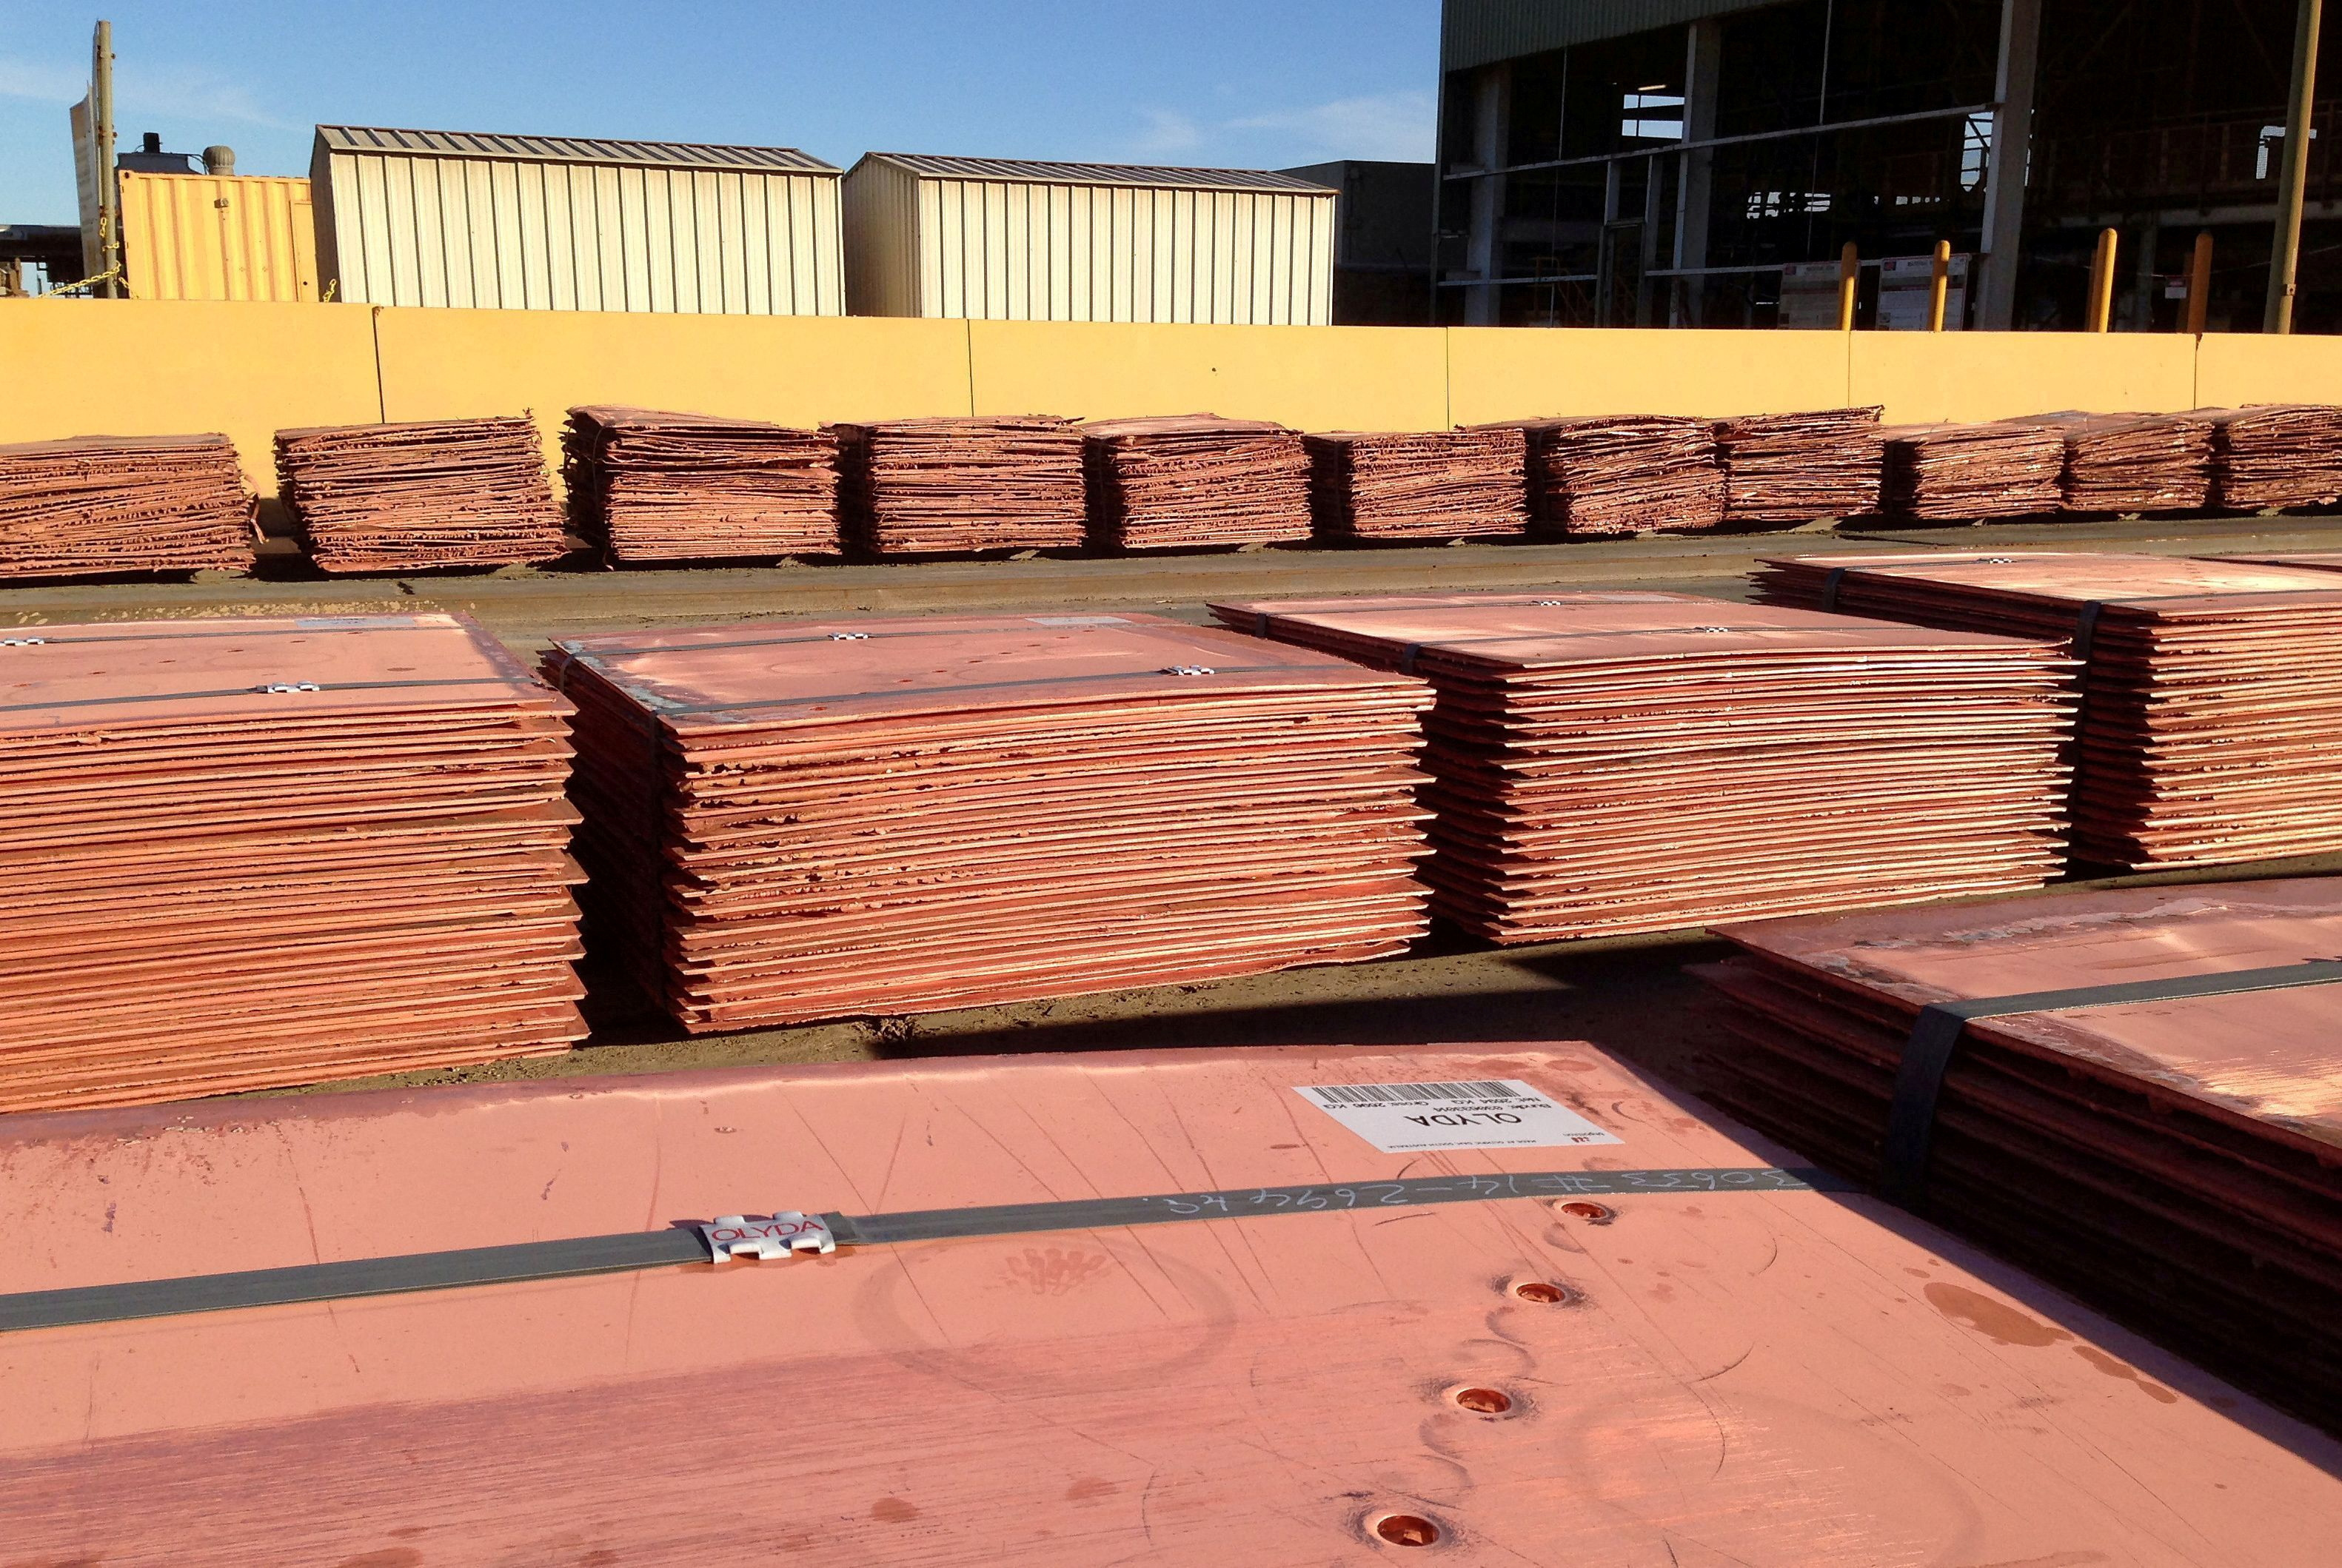 Refined copper bundles can be seen at BHP Billiton's Olympic Dam copper and uranium mine located in South Australia